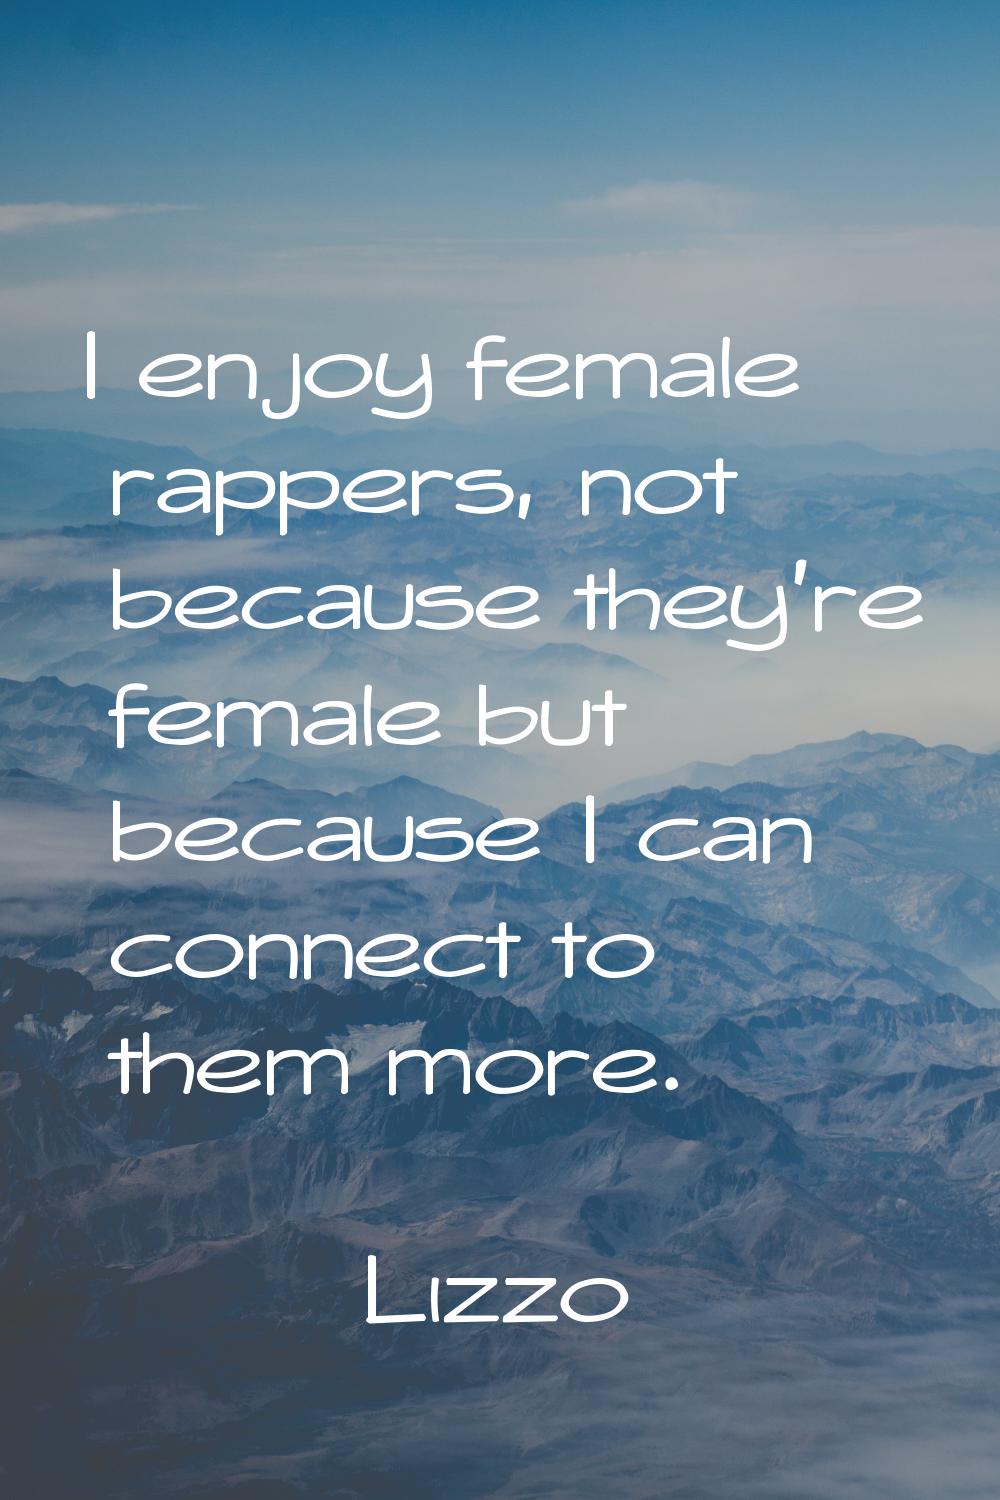 I enjoy female rappers, not because they're female but because I can connect to them more.